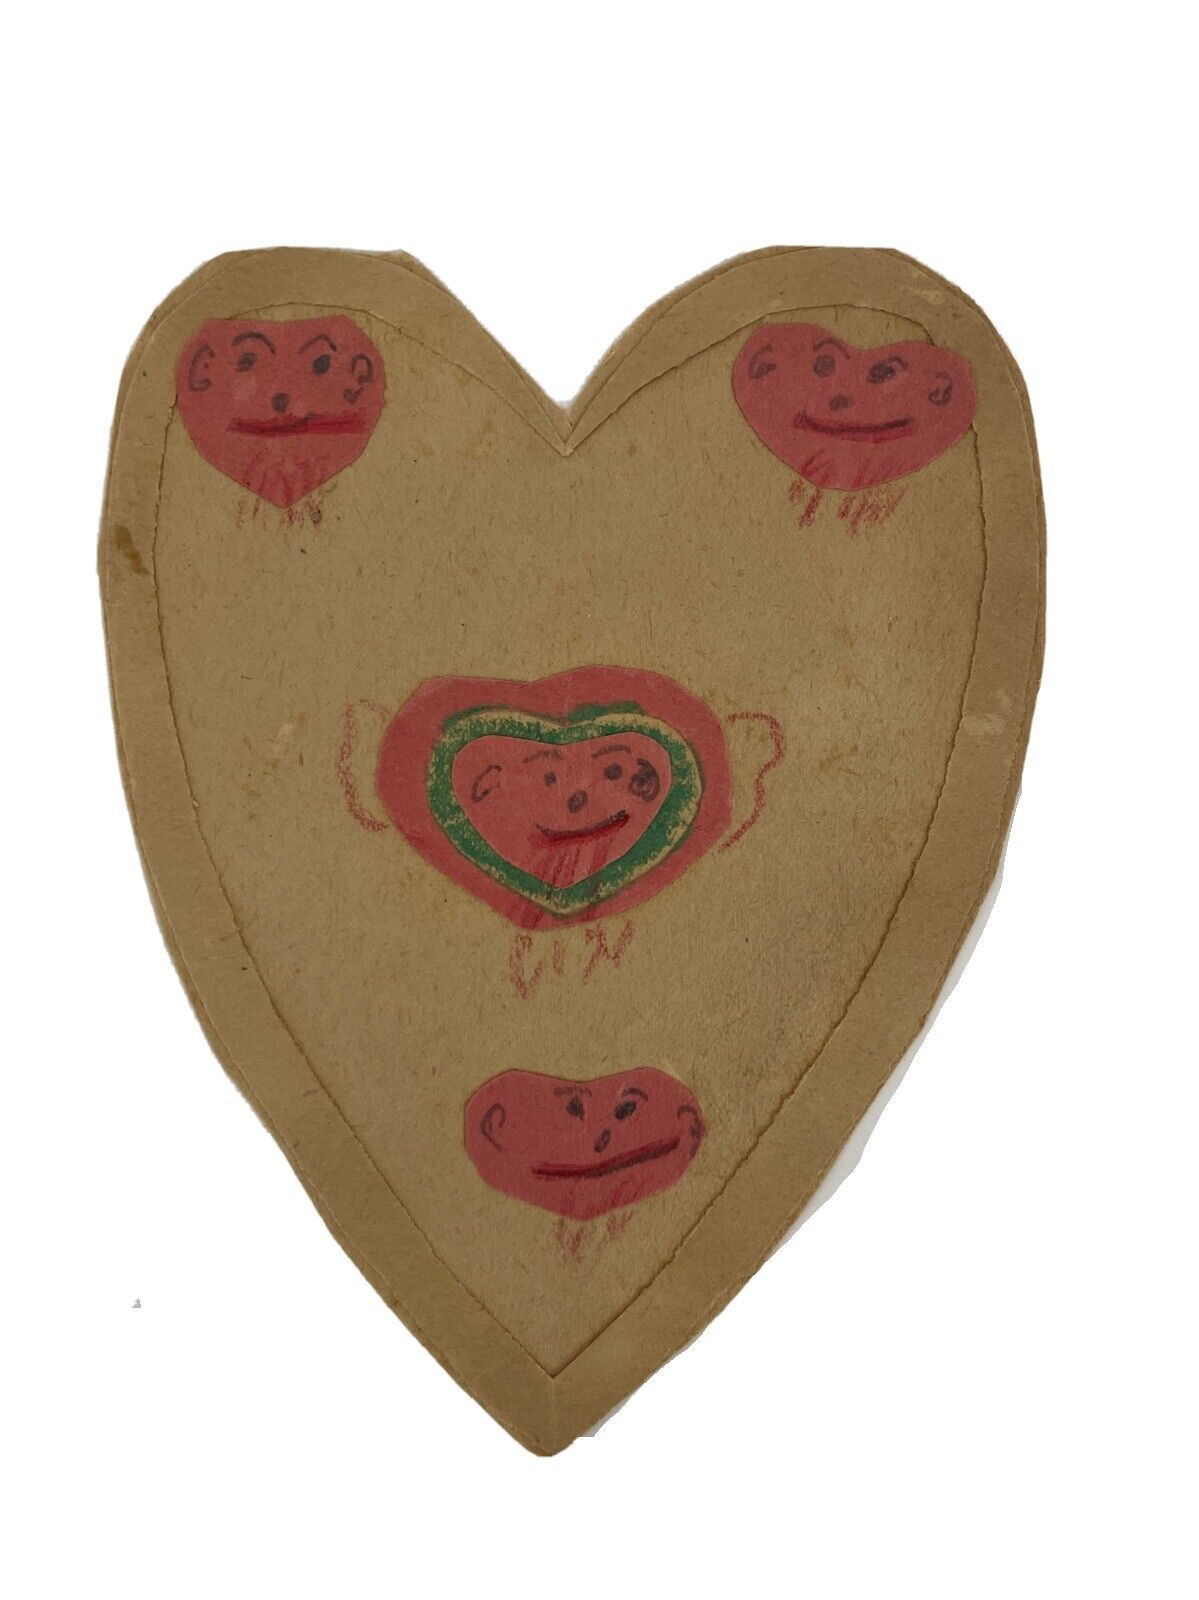 1928 Hand Made VALENTINE CARD Heart with Message